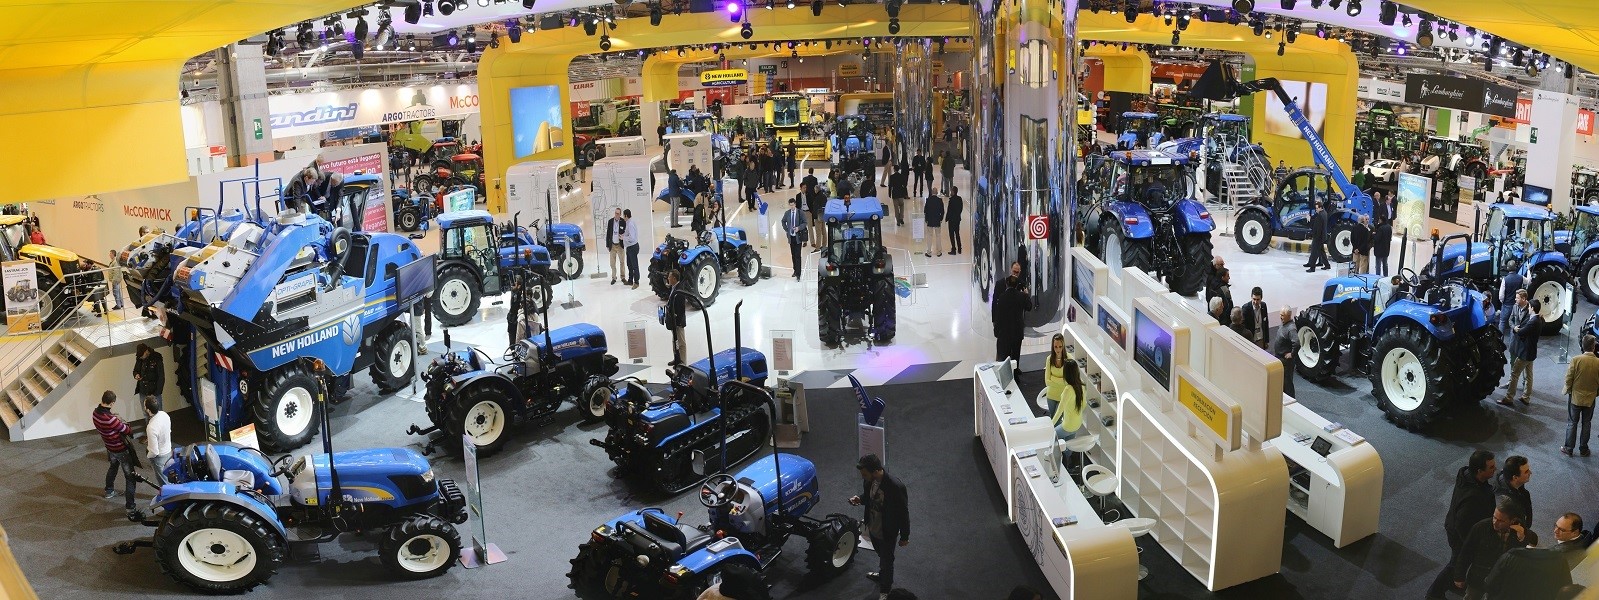 The New Holland stand at the 50th anniversary edition of FIMA